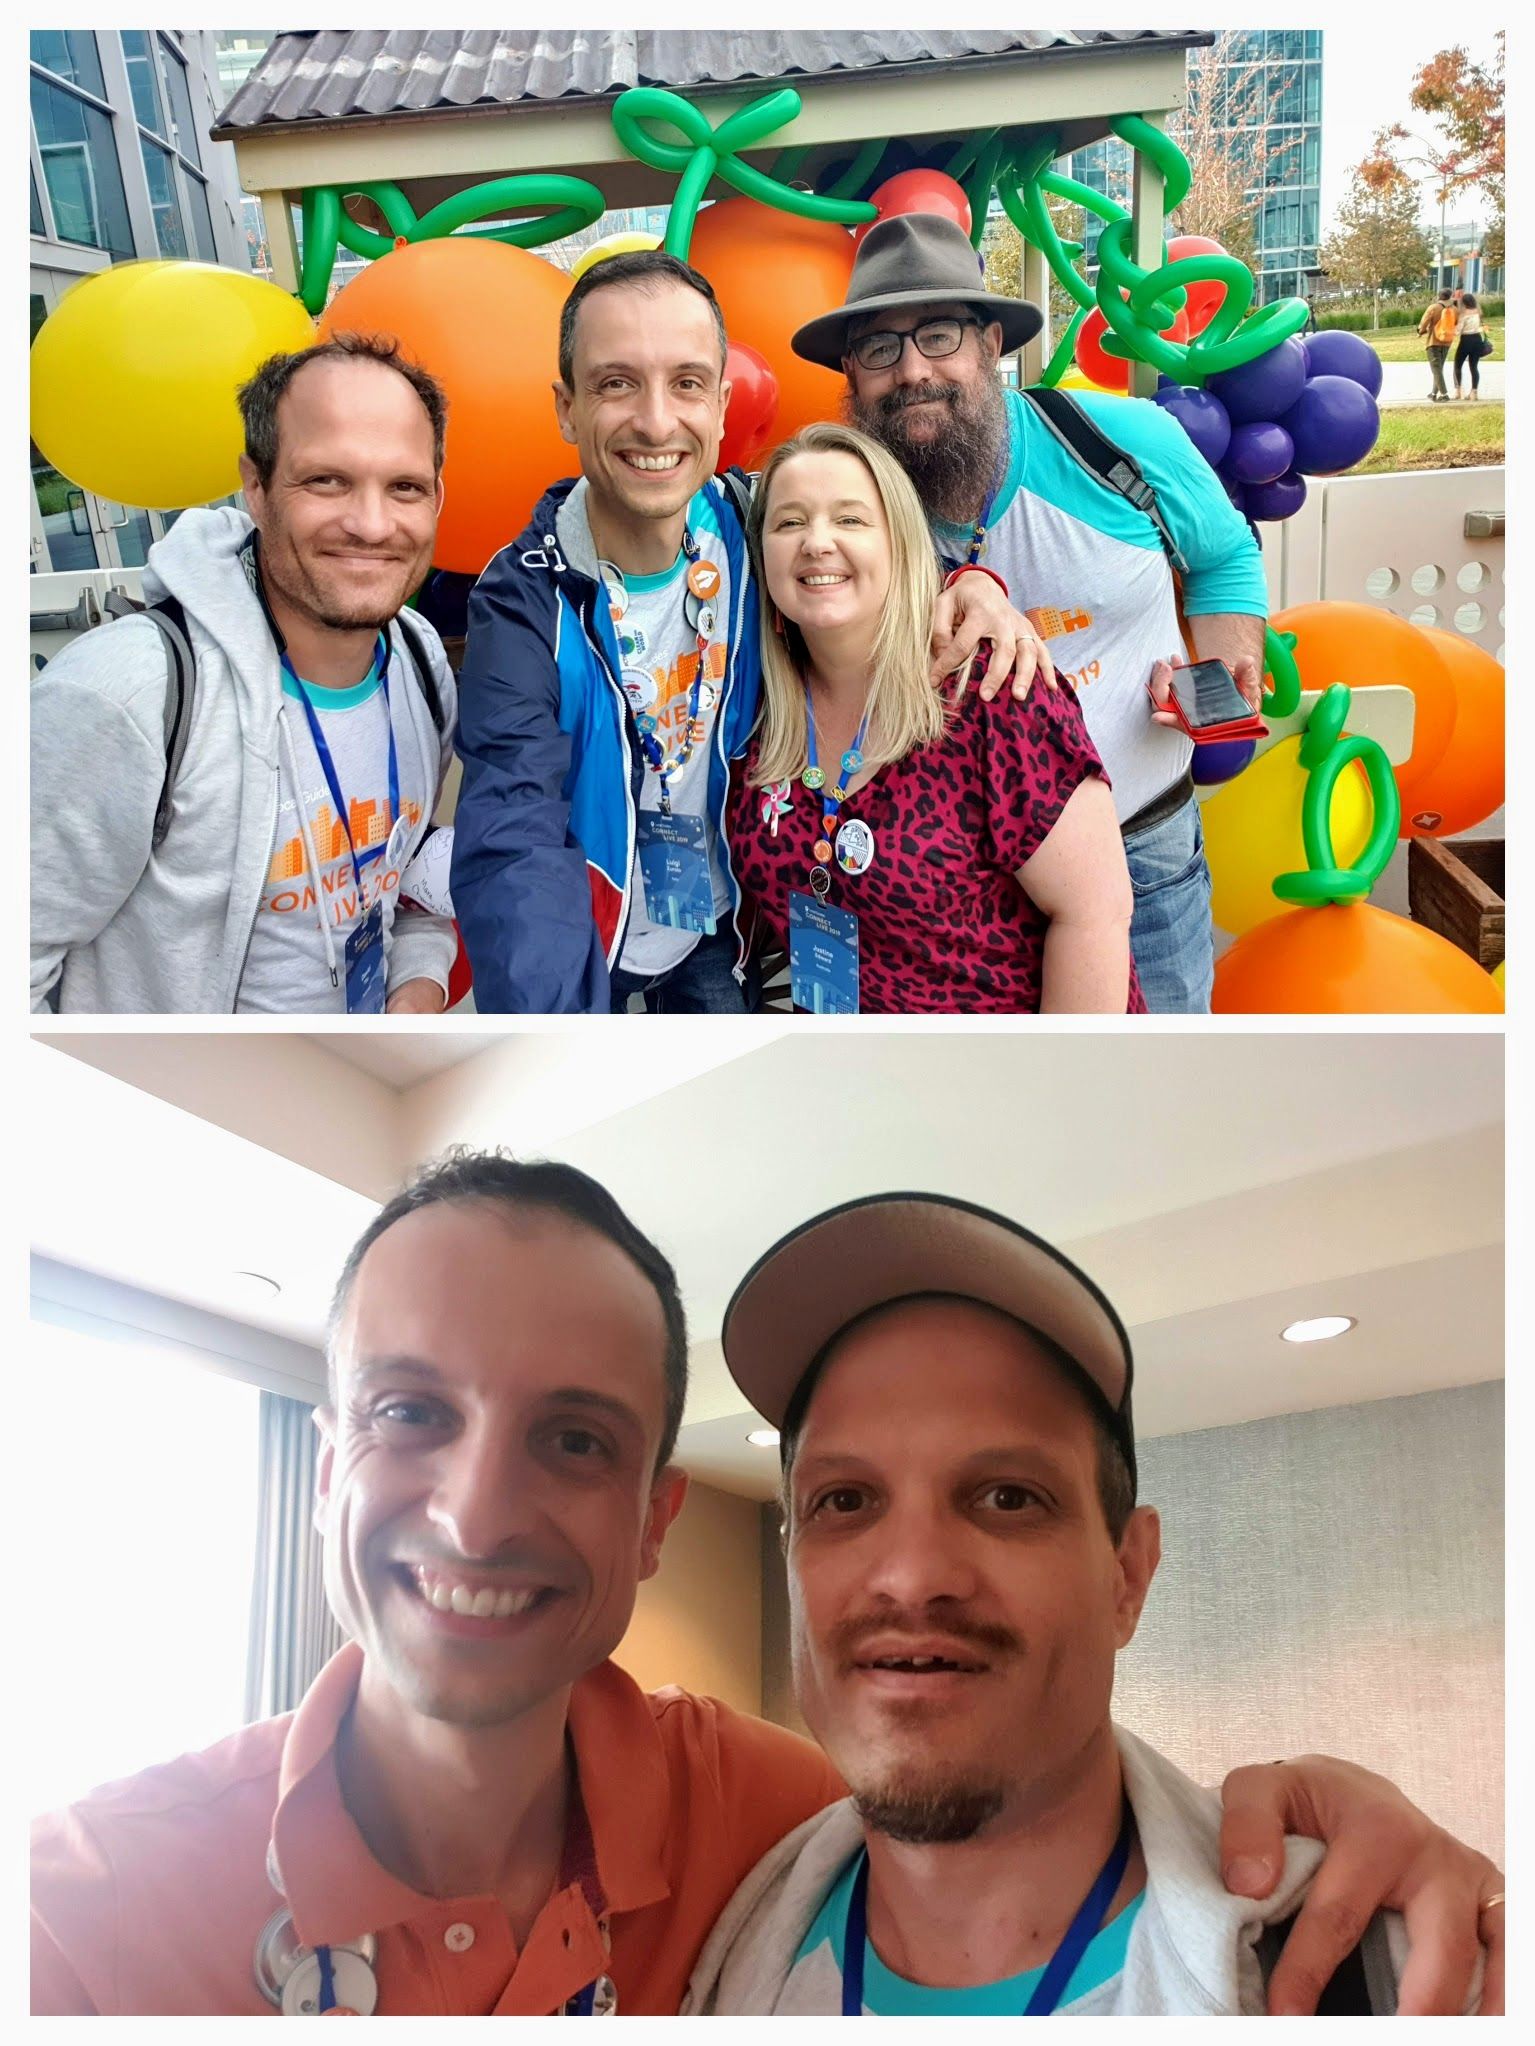 Collage, upper: group selfies with LG @DavidTito, @JustineE, @PaulPavlinovich in front of Google colored balloons, bottom: selfie with LG @DavidTito in the hotel at the CL19 goodbye brunch - Local guide @LuigiZ